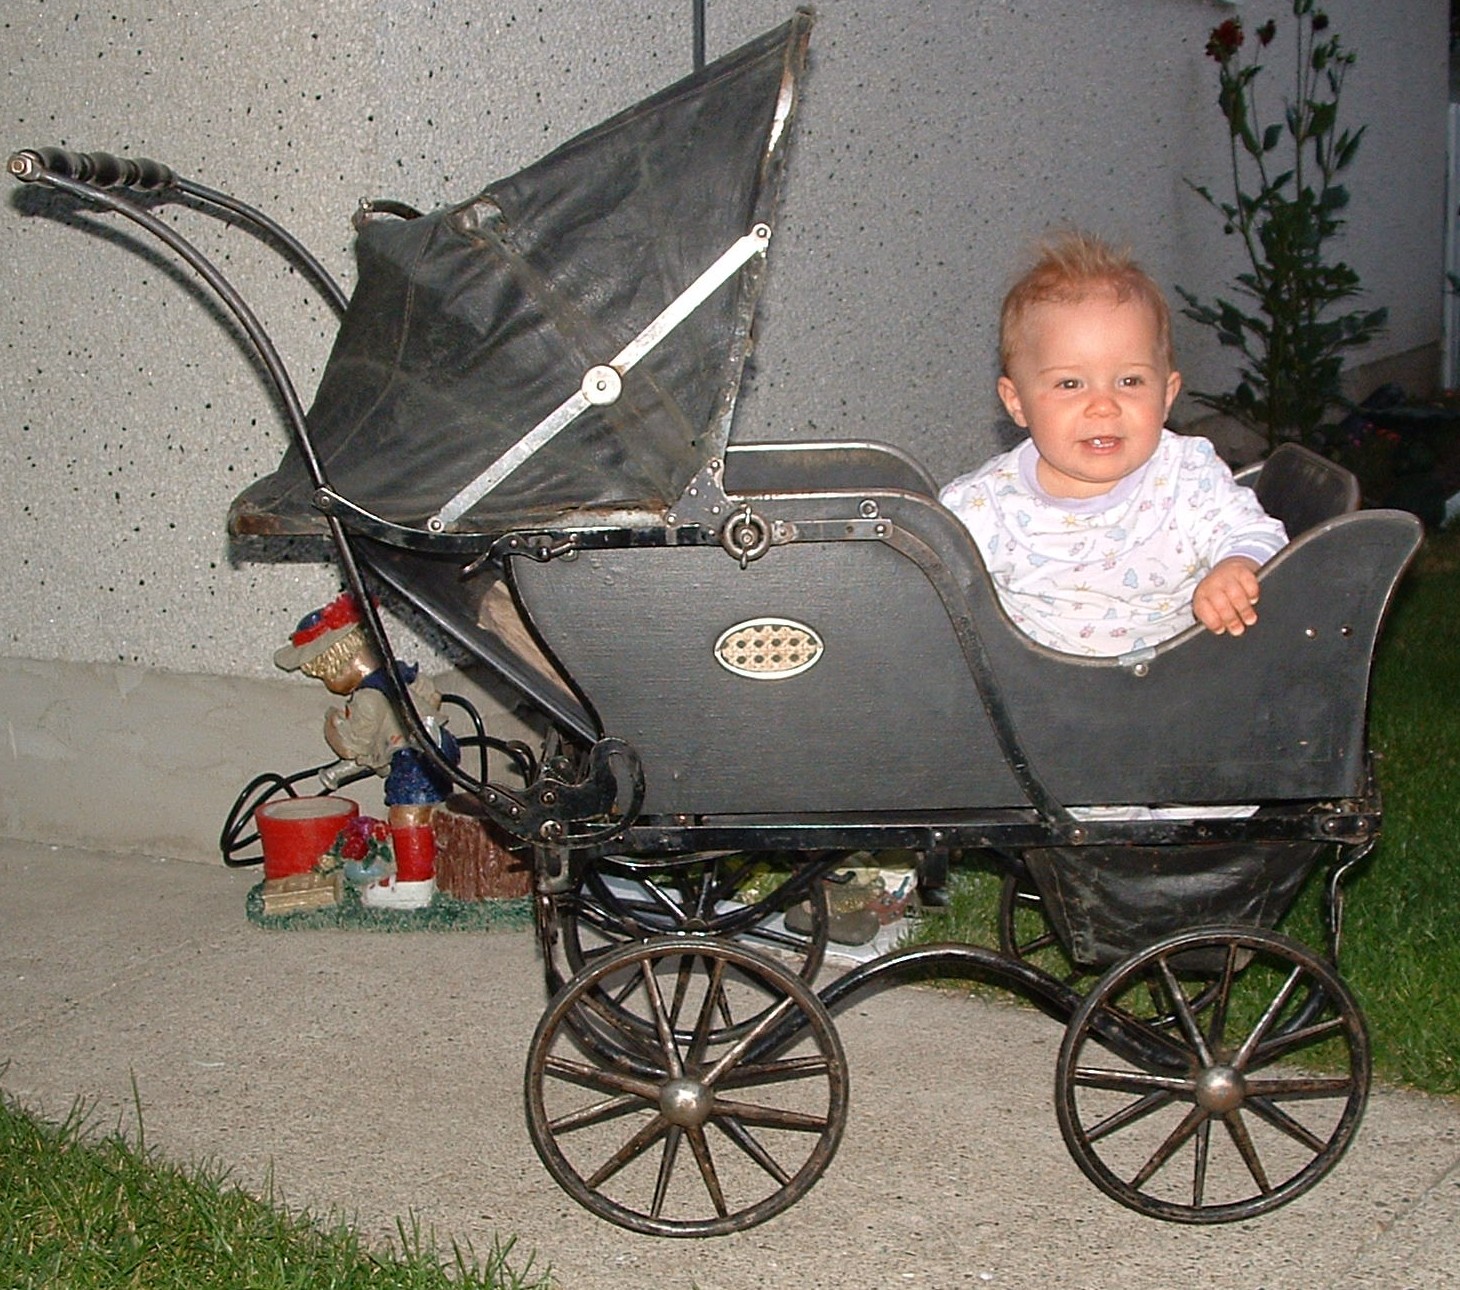 antique baby carriage value